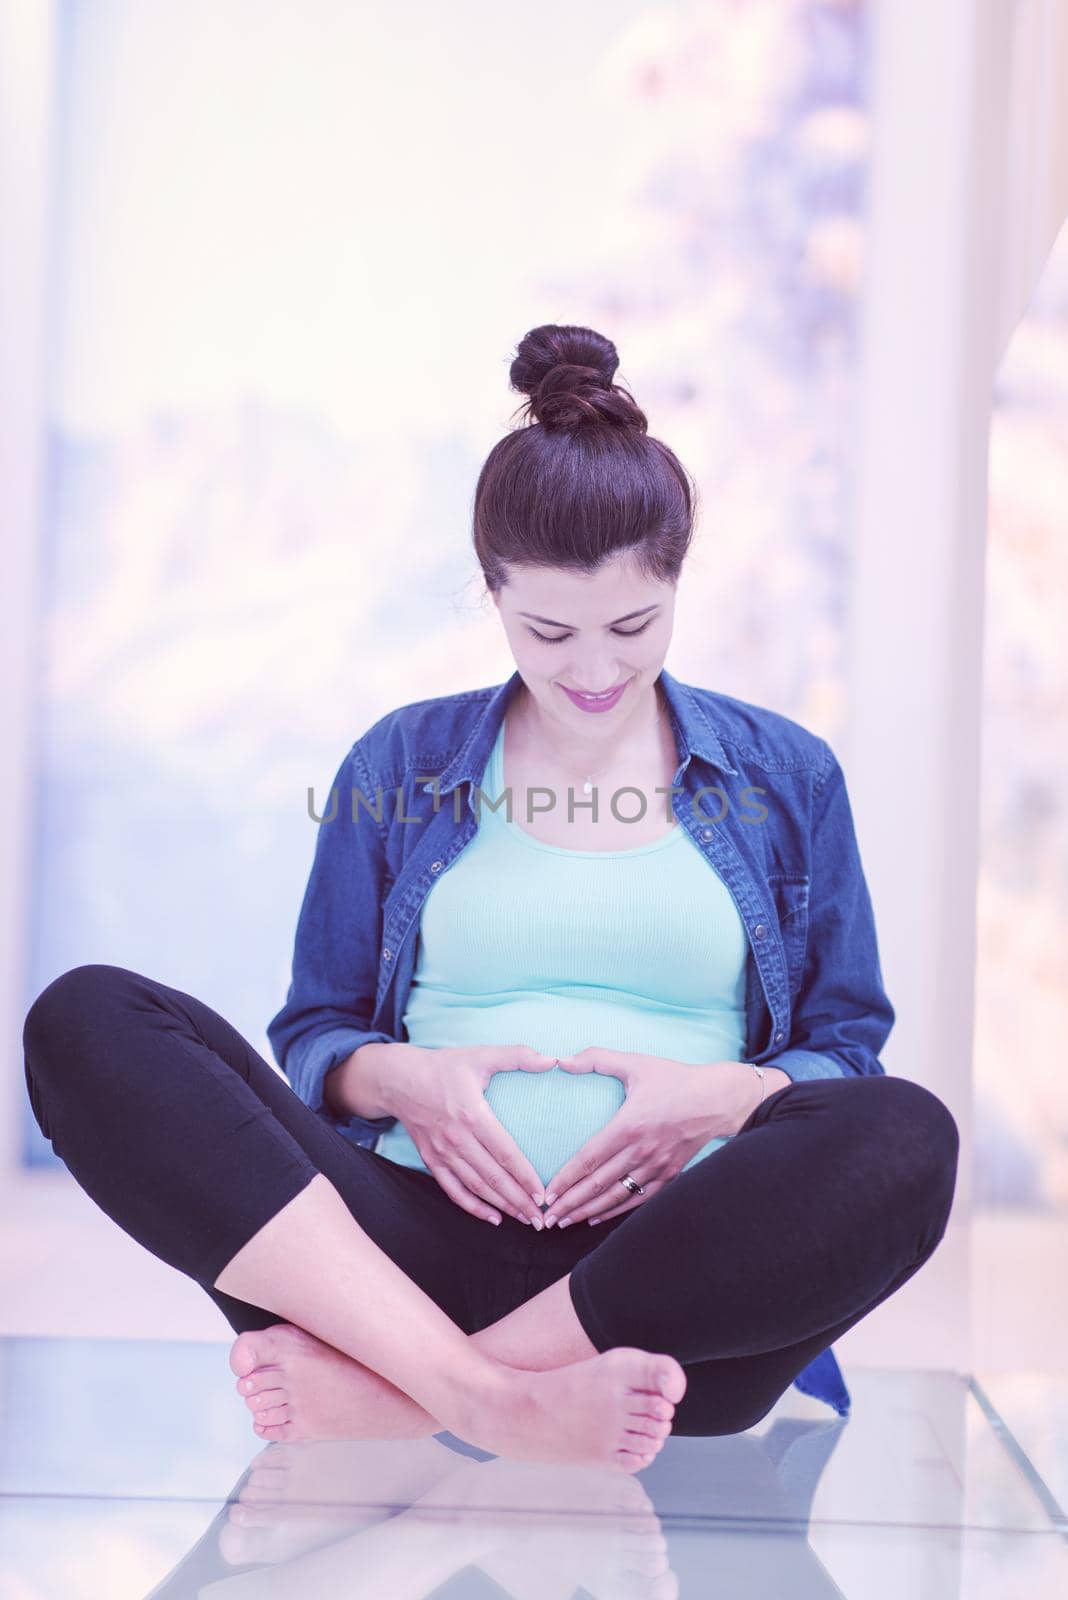 happy pregnant women enjoying pregnancy relaxing at home sitting on the floor